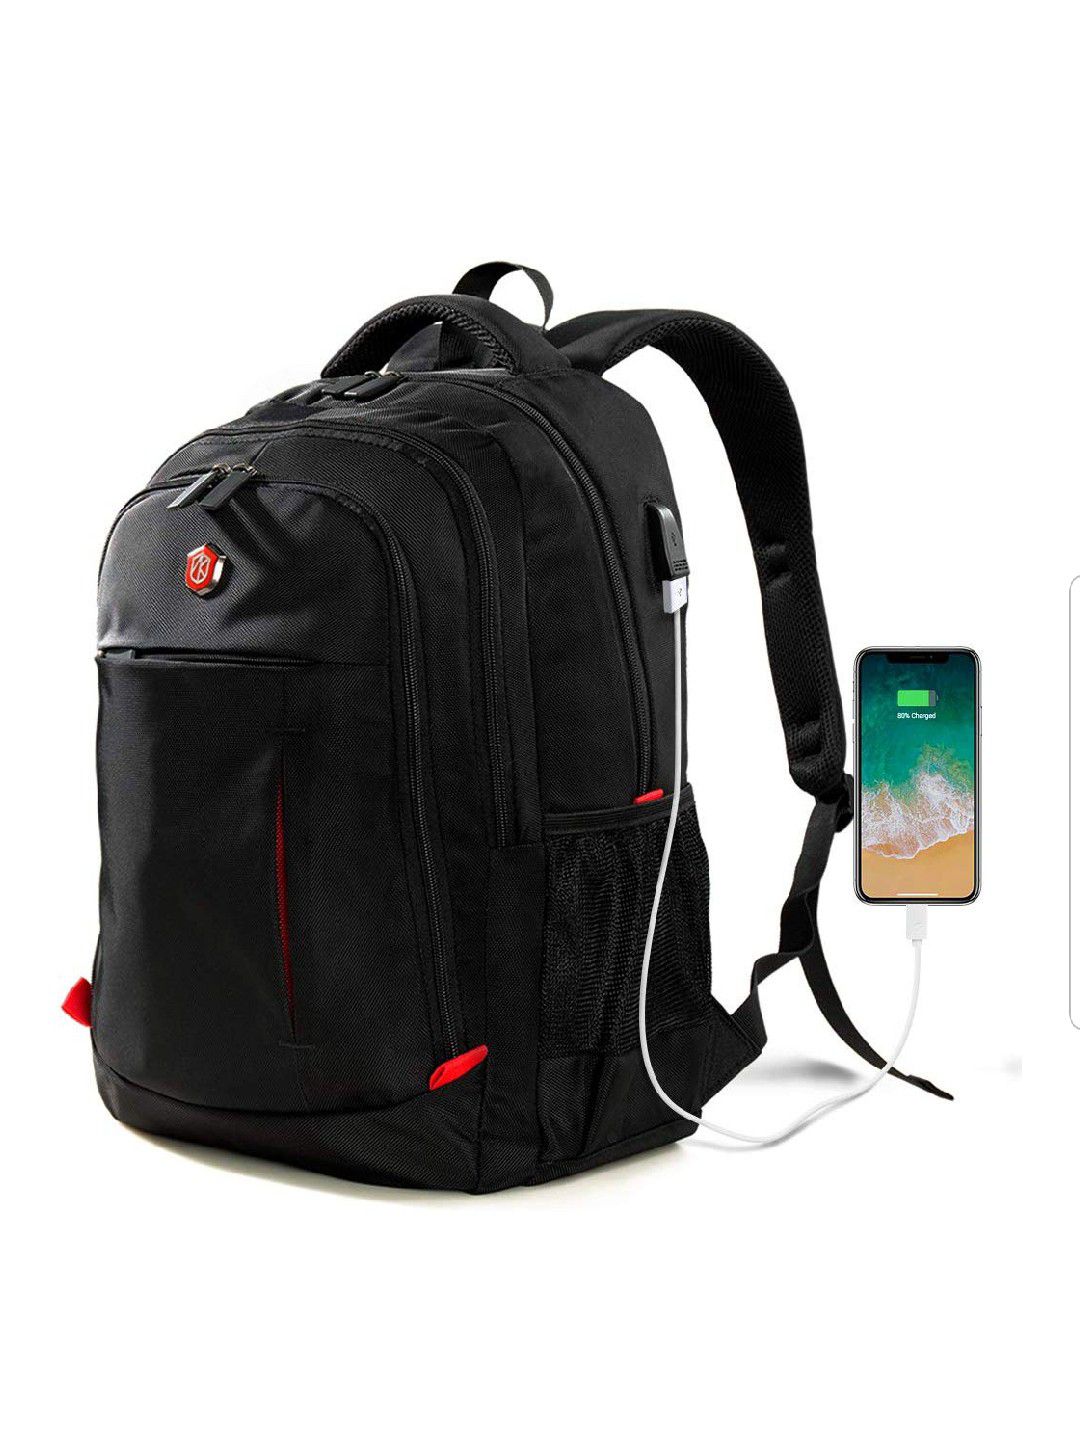 Laptop Backpack, Travel Waterproof Computer Bag for Women Men NEW High Quality